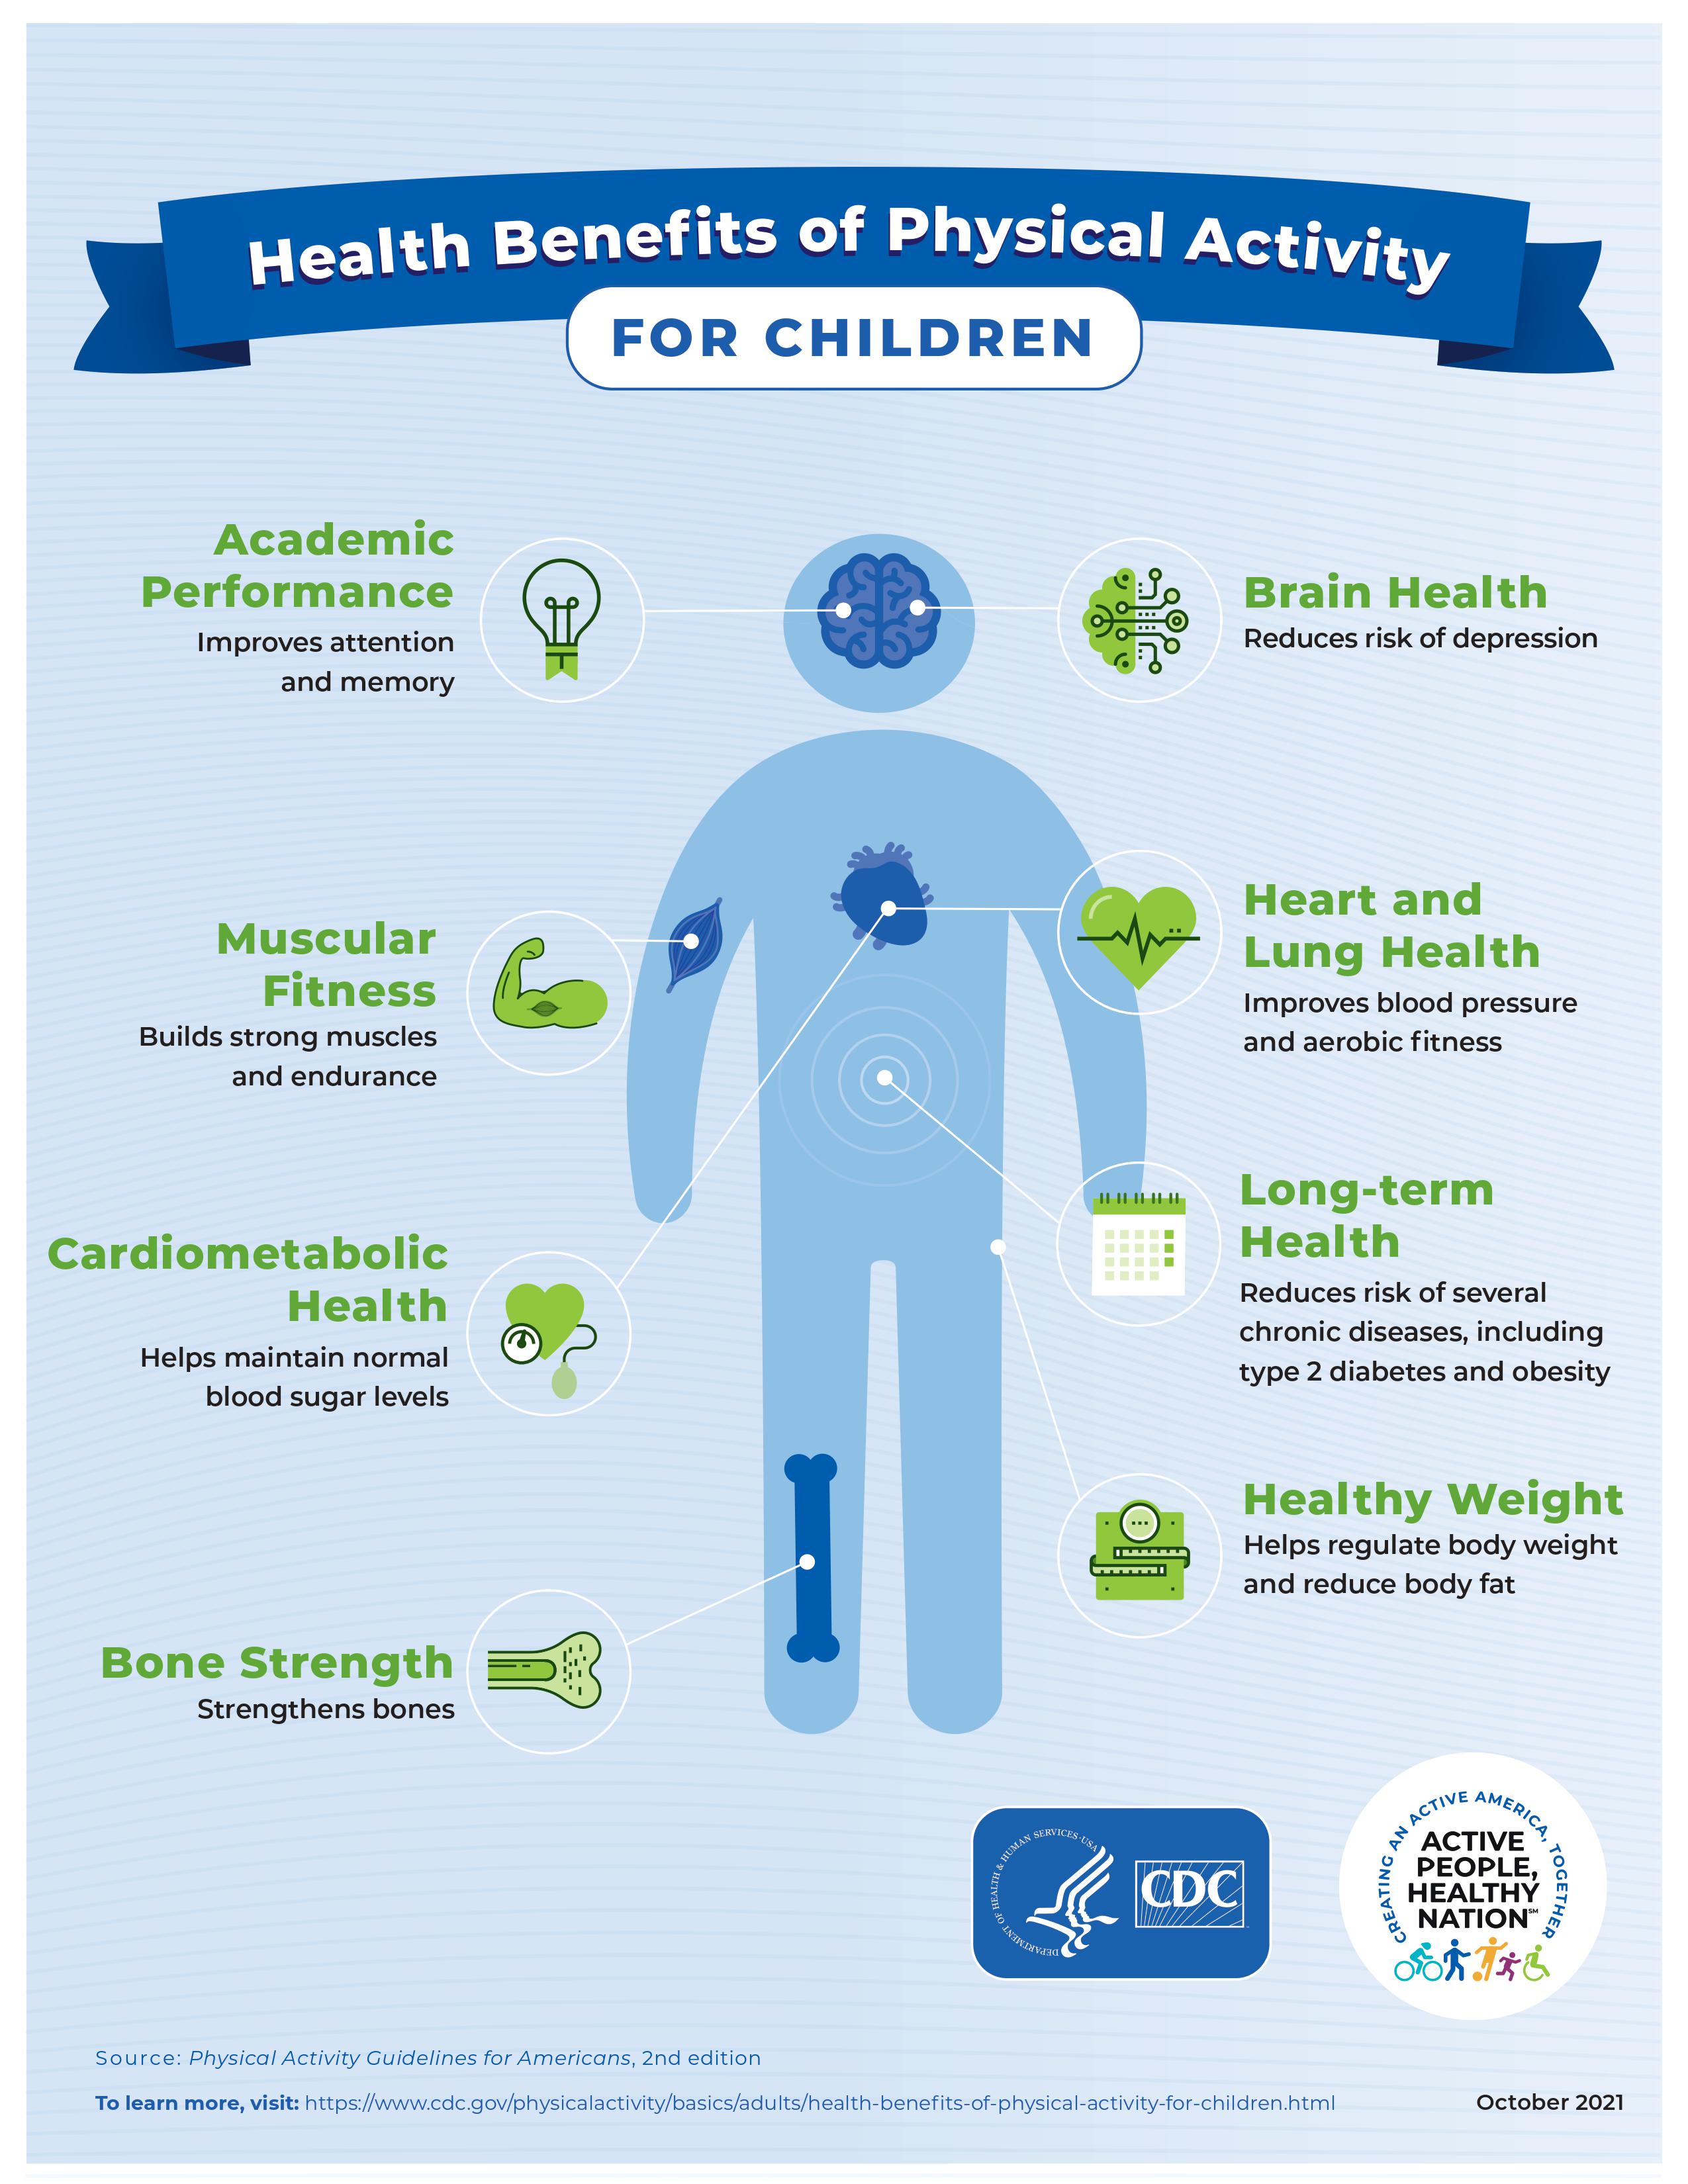 The benefits of physical activity in children info graphic